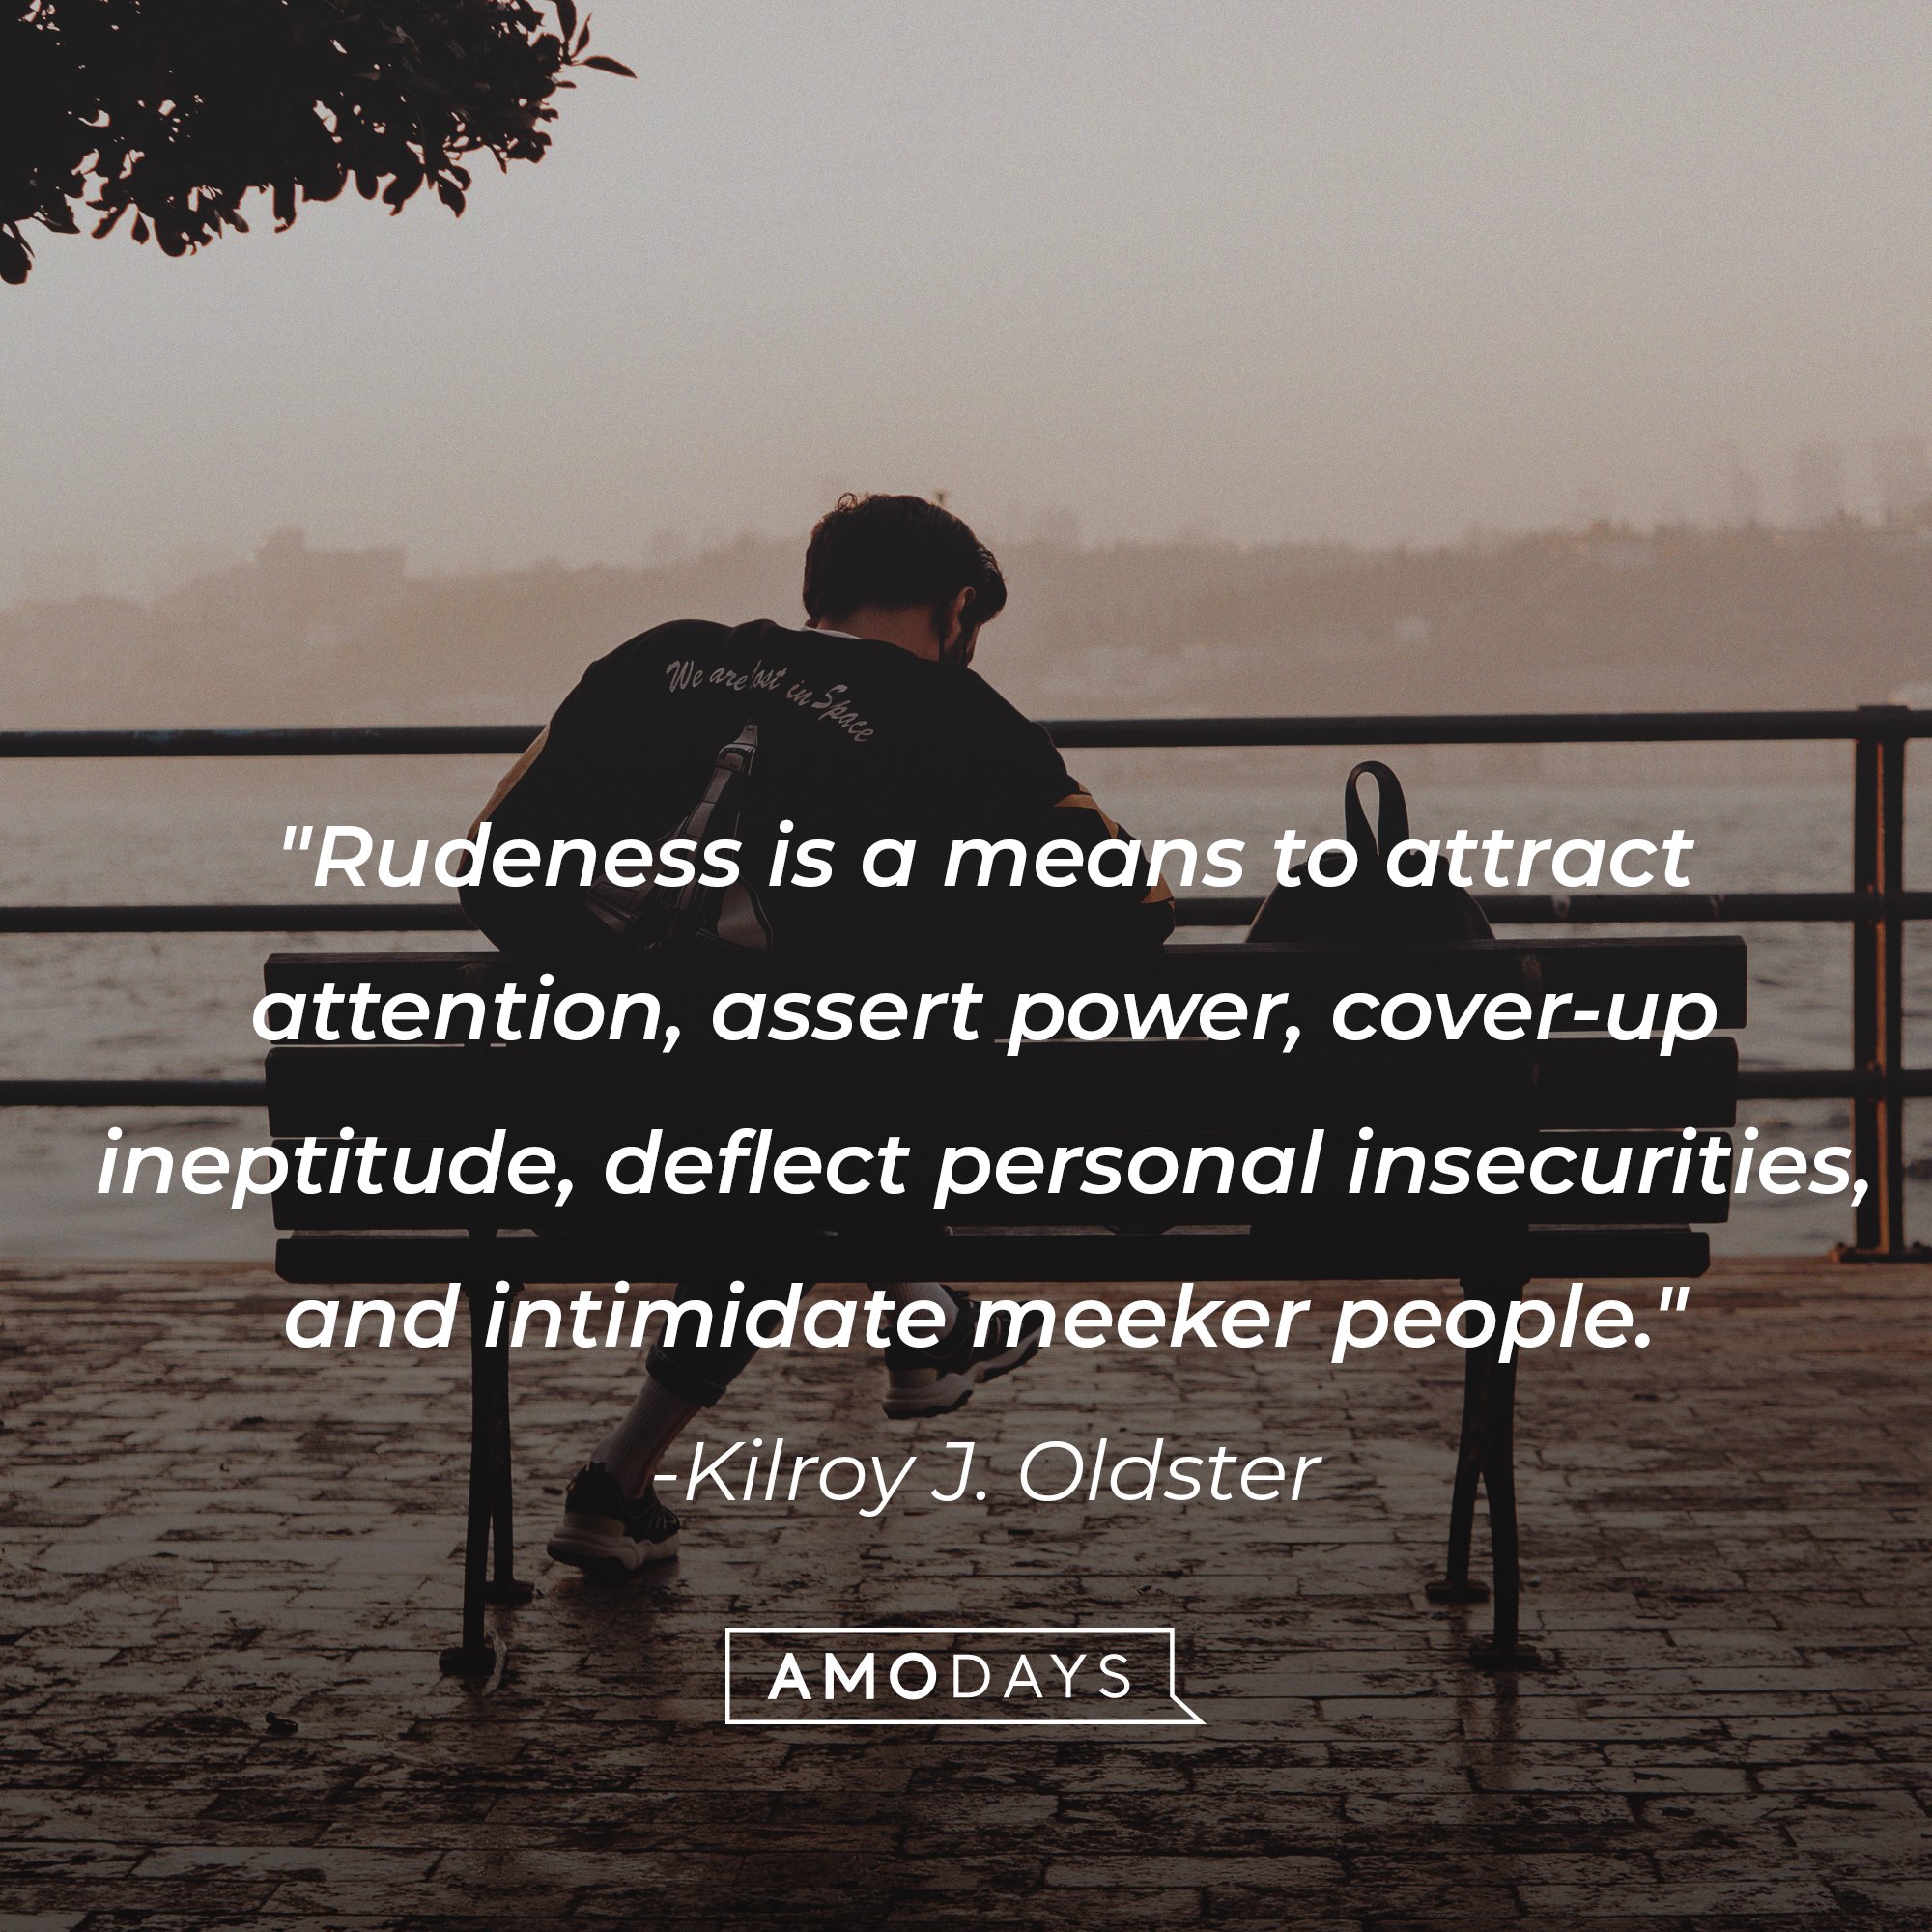 Kilroy J. Oldster’s quote: "Rudeness is a means to attract attention, assert power, cover-up ineptitude, deflect personal insecurities, and intimidate meeker people." | Image: AmoDays